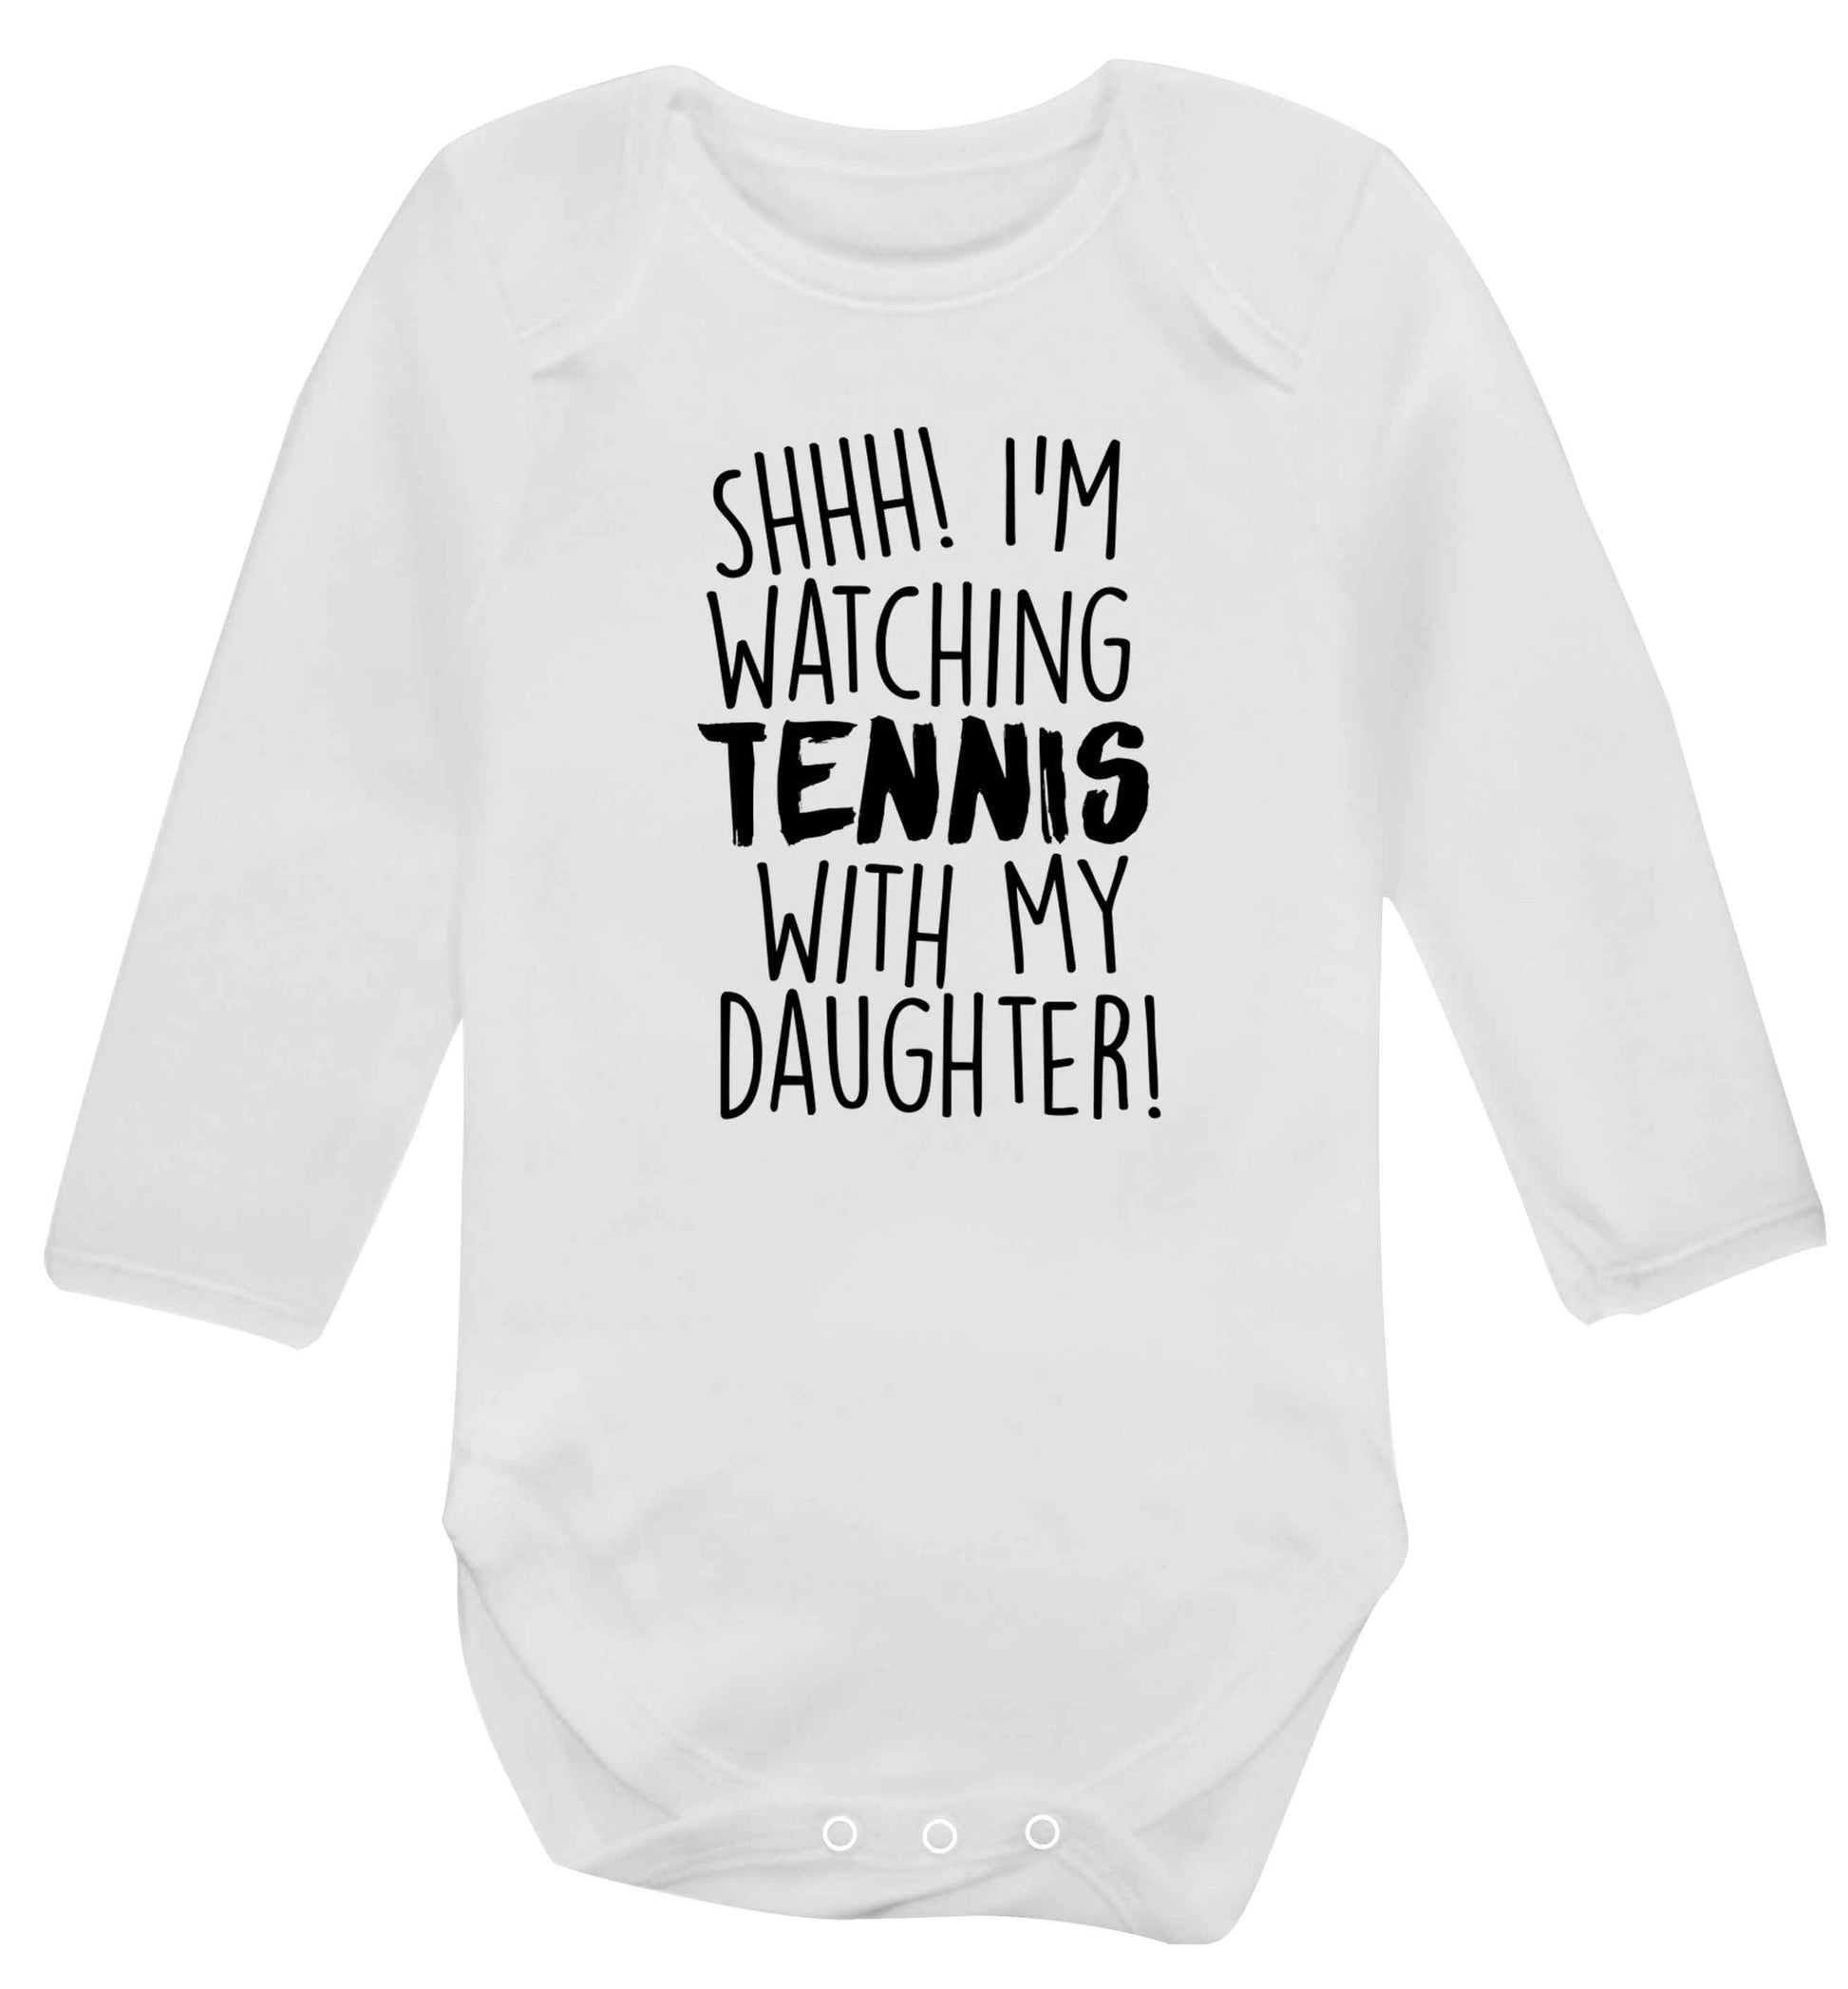 Shh! I'm watching tennis with my daughter! Baby Vest long sleeved white 6-12 months